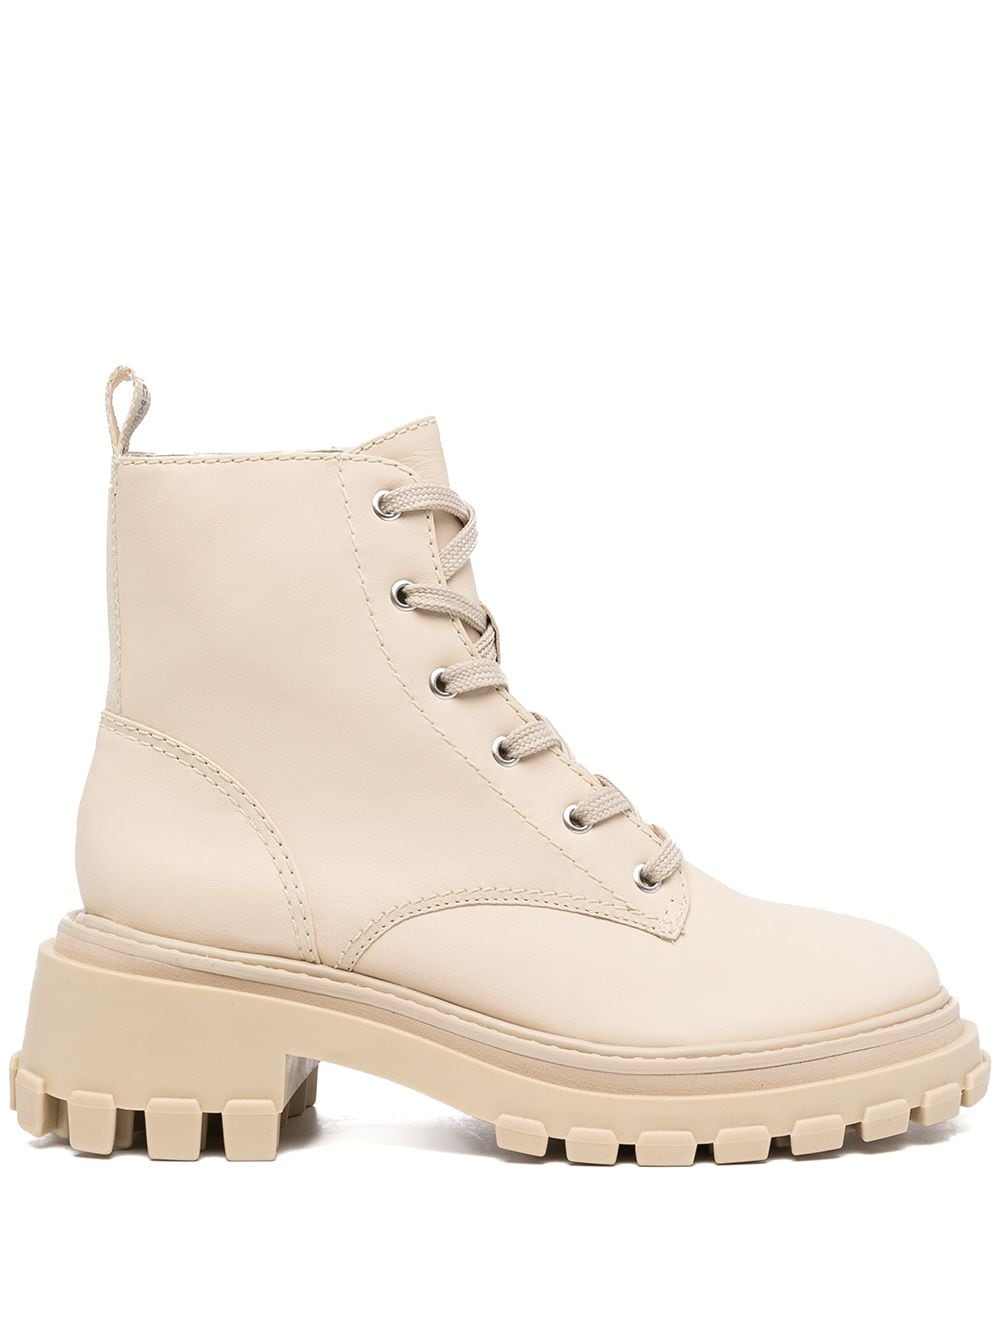 Schutz Orly lace-up Boots - Farfetch